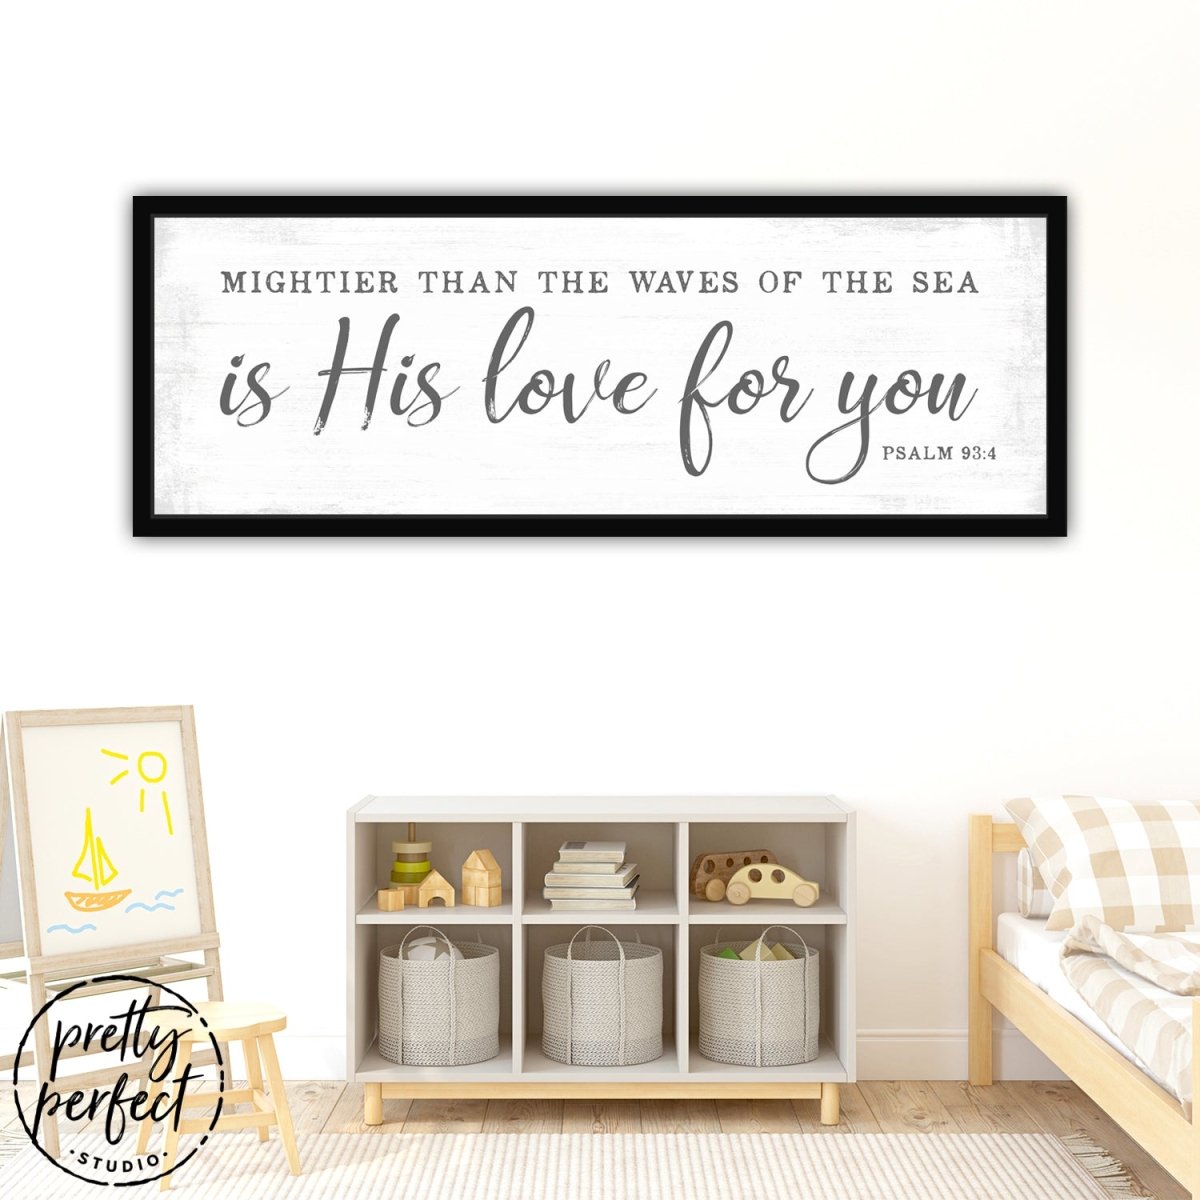 Mightier Than the Waves of the Sea Is His Love For You Sign Above Shelf - Pretty Perfect Studio